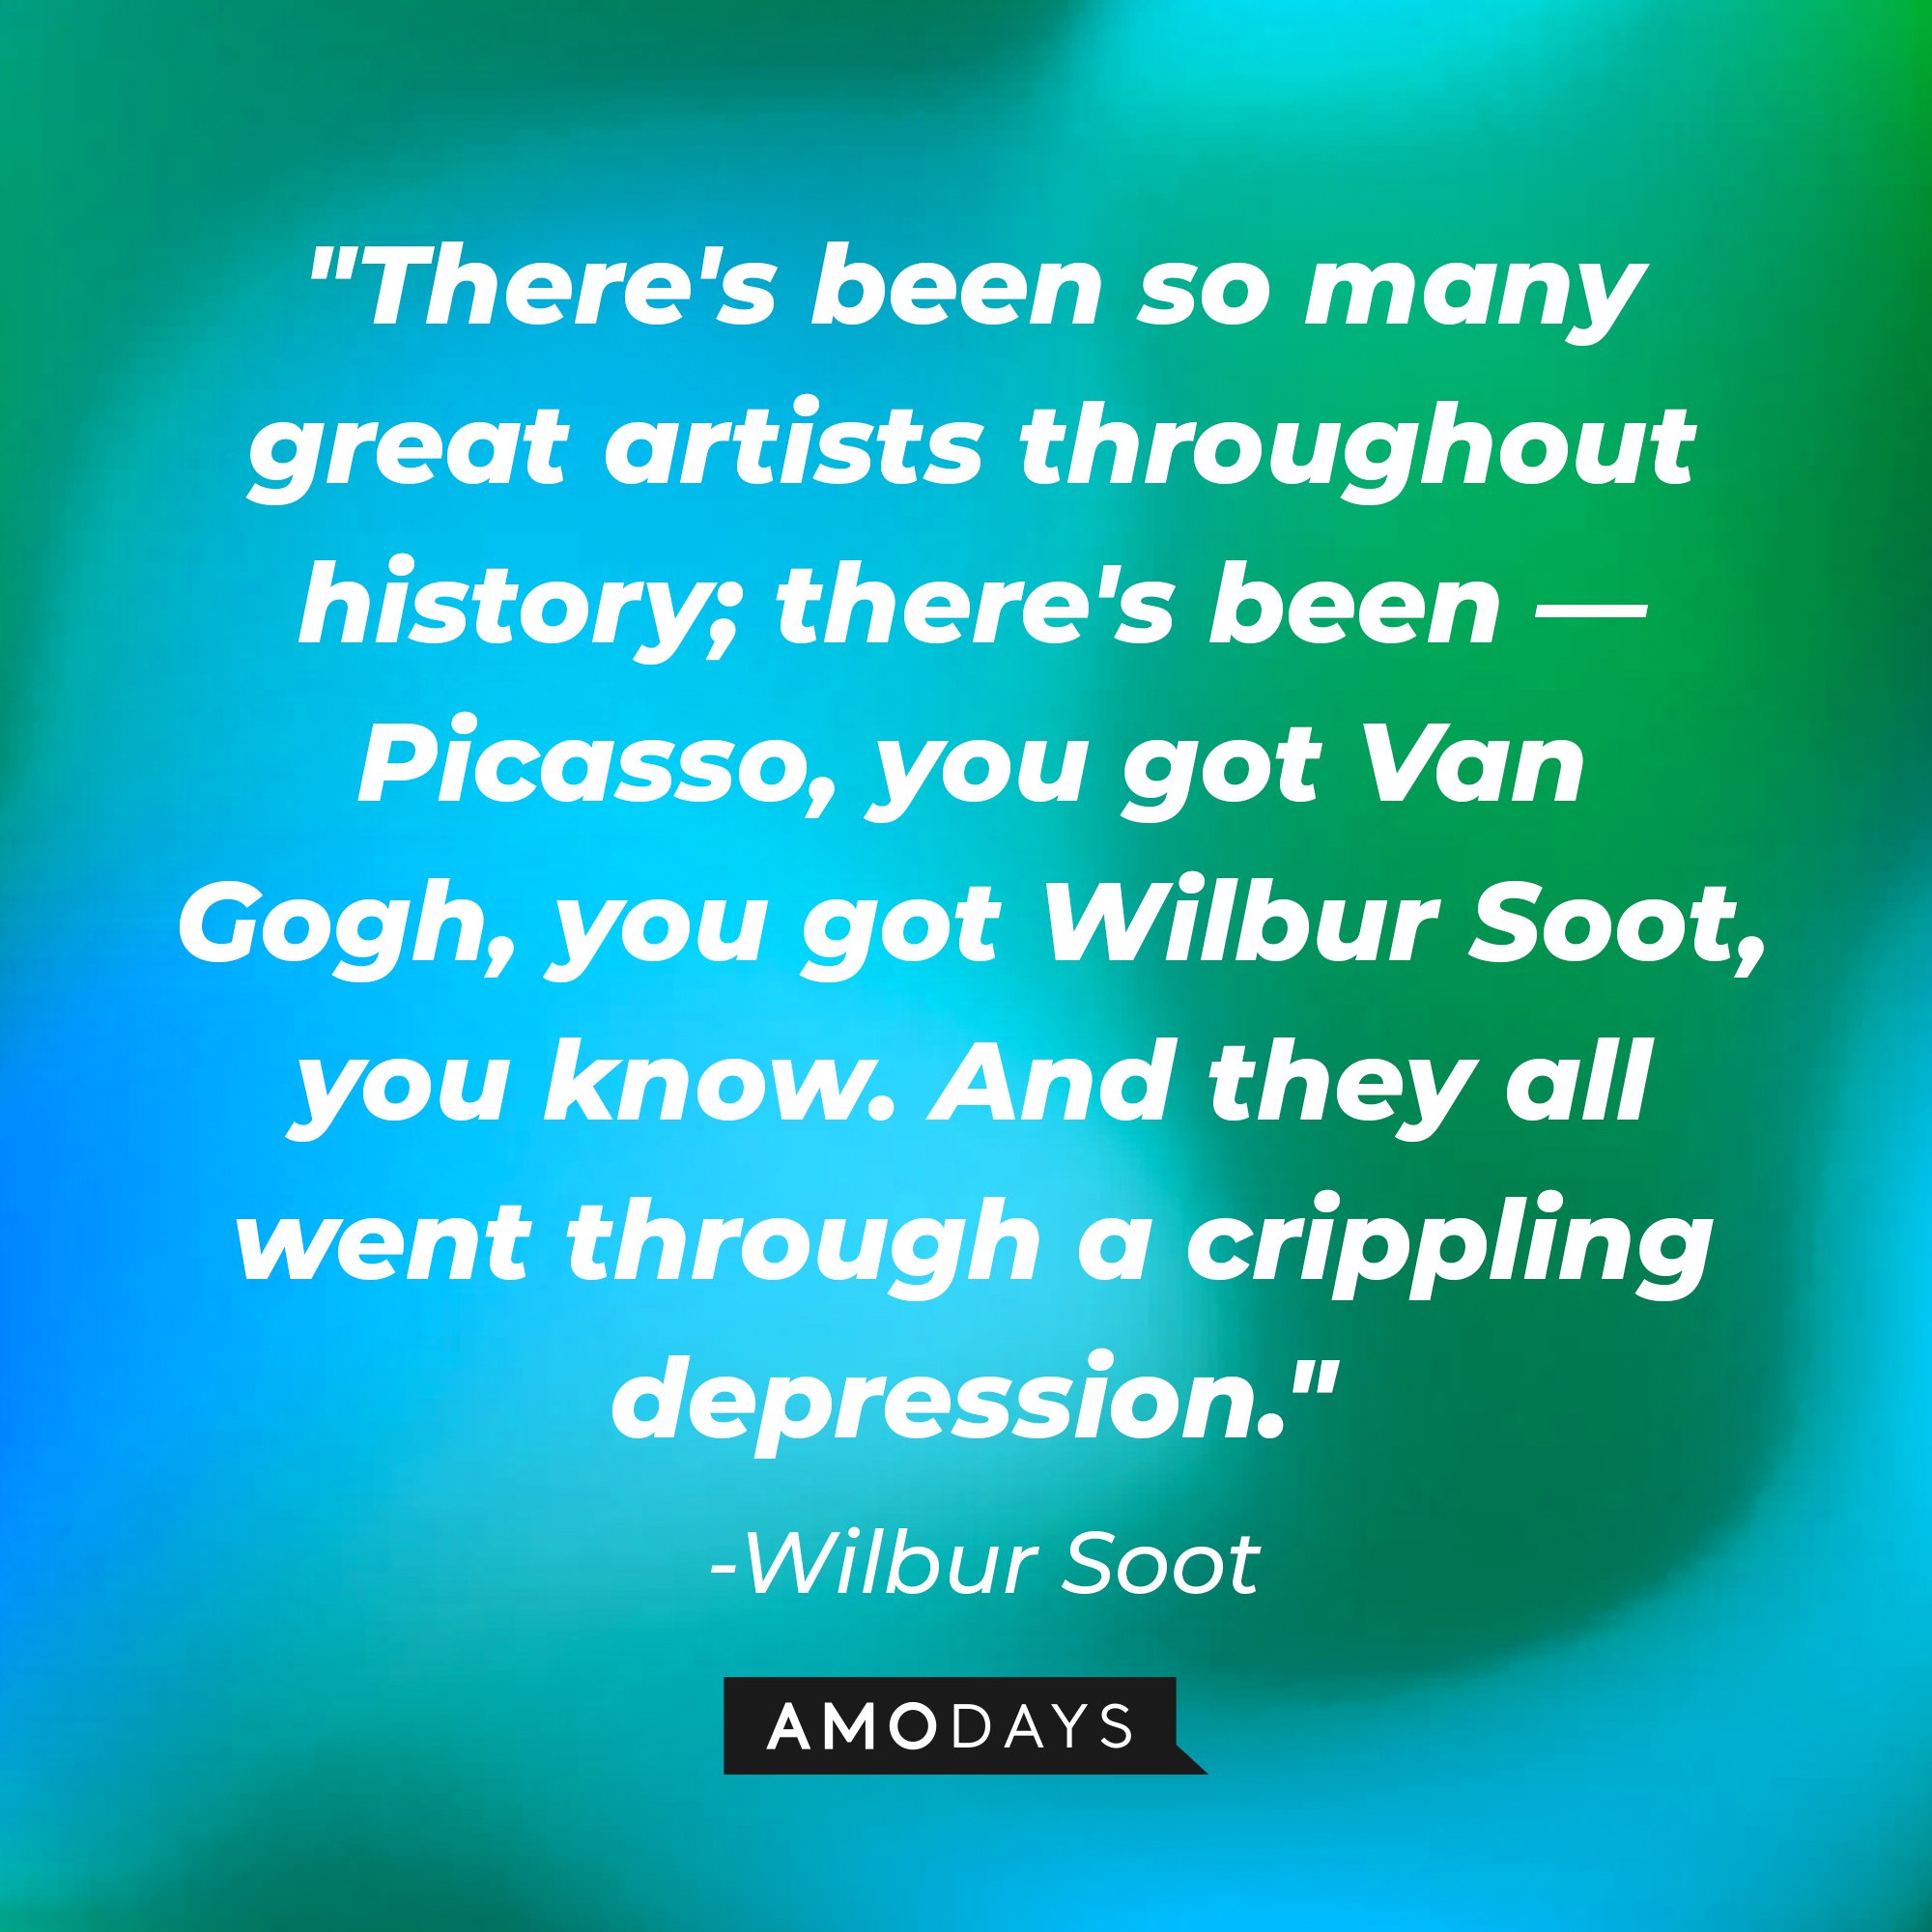 Wilbur Soot's quote: "There's been so many great artists throughout history; there's been — Picasso, you got Van Gogh, you got Wilbur Soot, you know. And they all went through a crippling depression." | Image: AmoDays